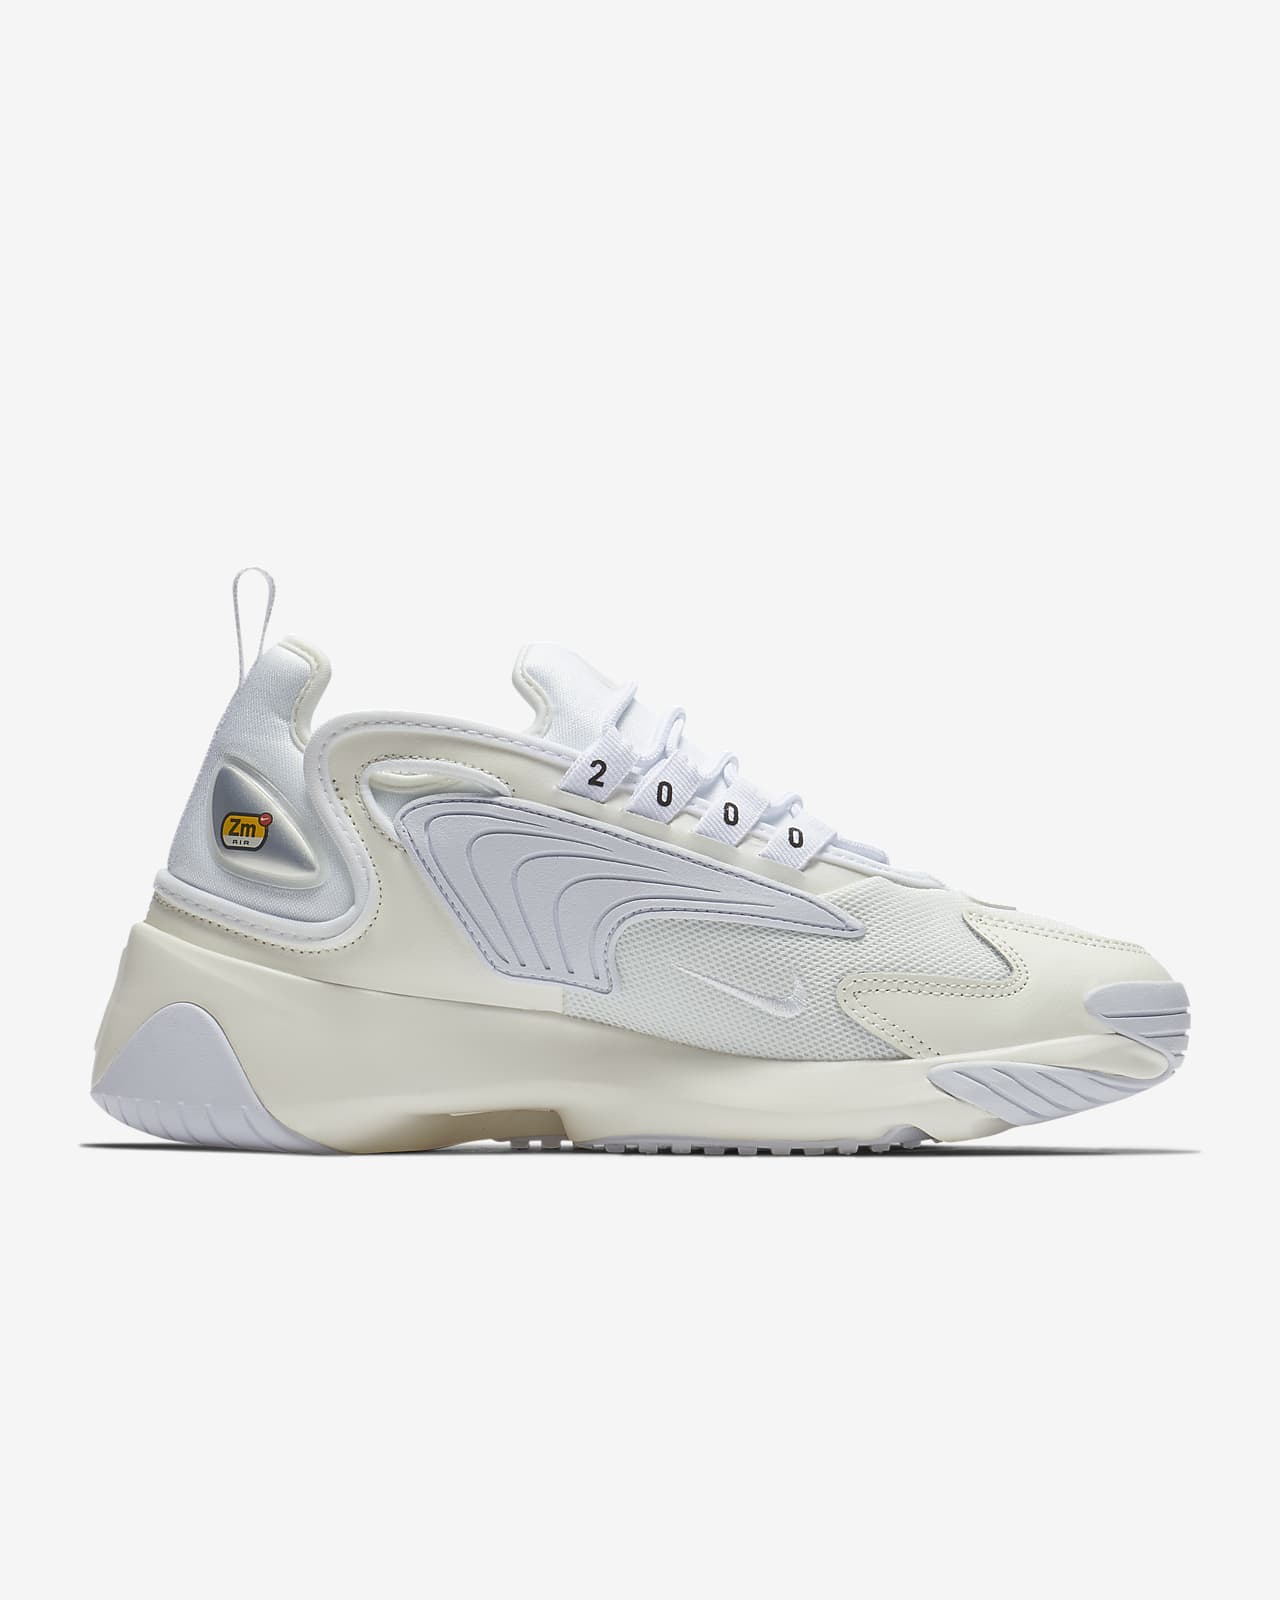 Chaussure Nike Zoom 2K pour Femme